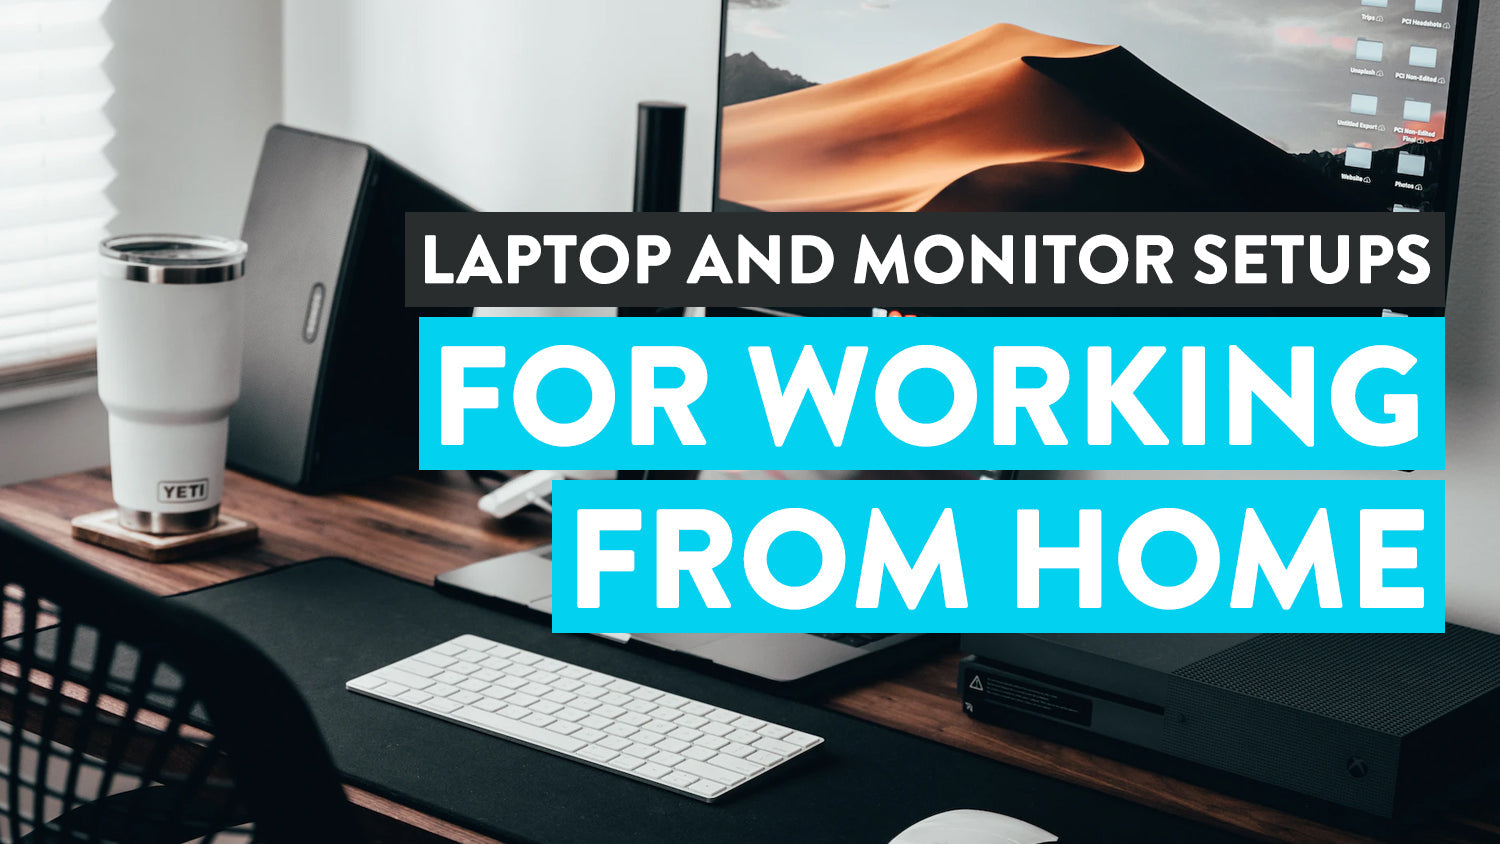 The Best Accessories For An Ergonomic Desk Setup In Your Home